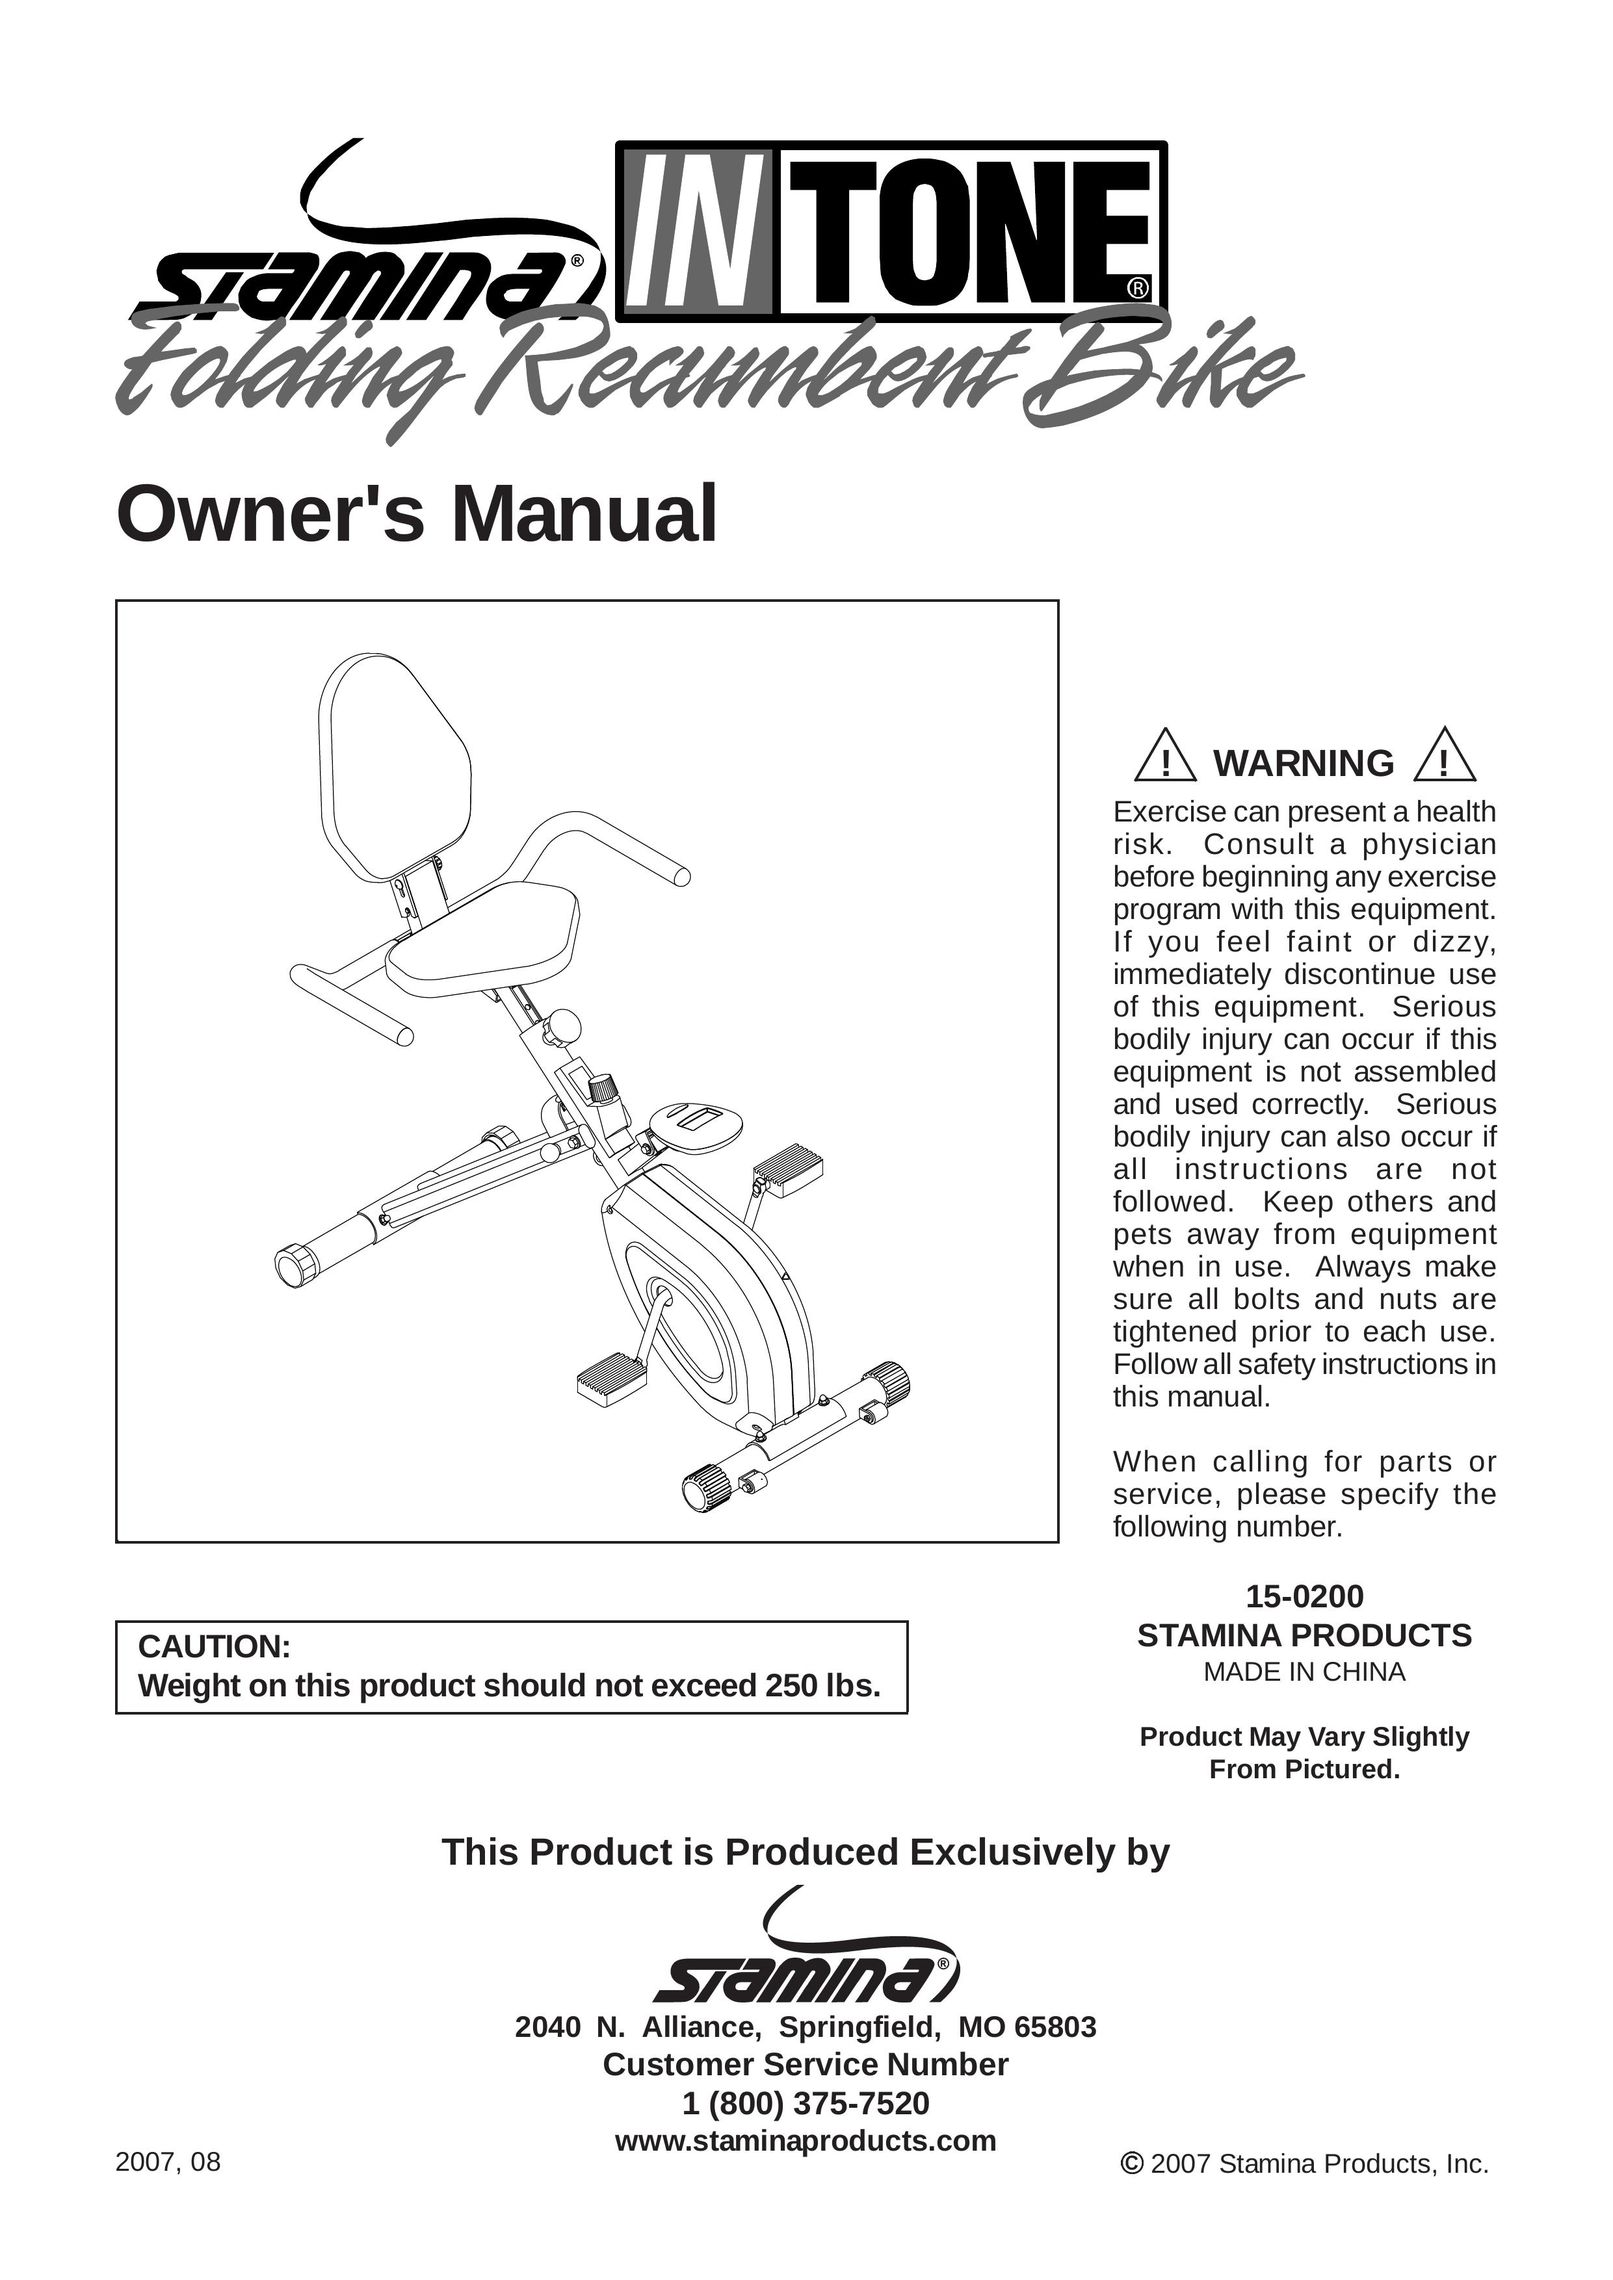 Stamina Products 15-0200 Exercise Bike User Manual